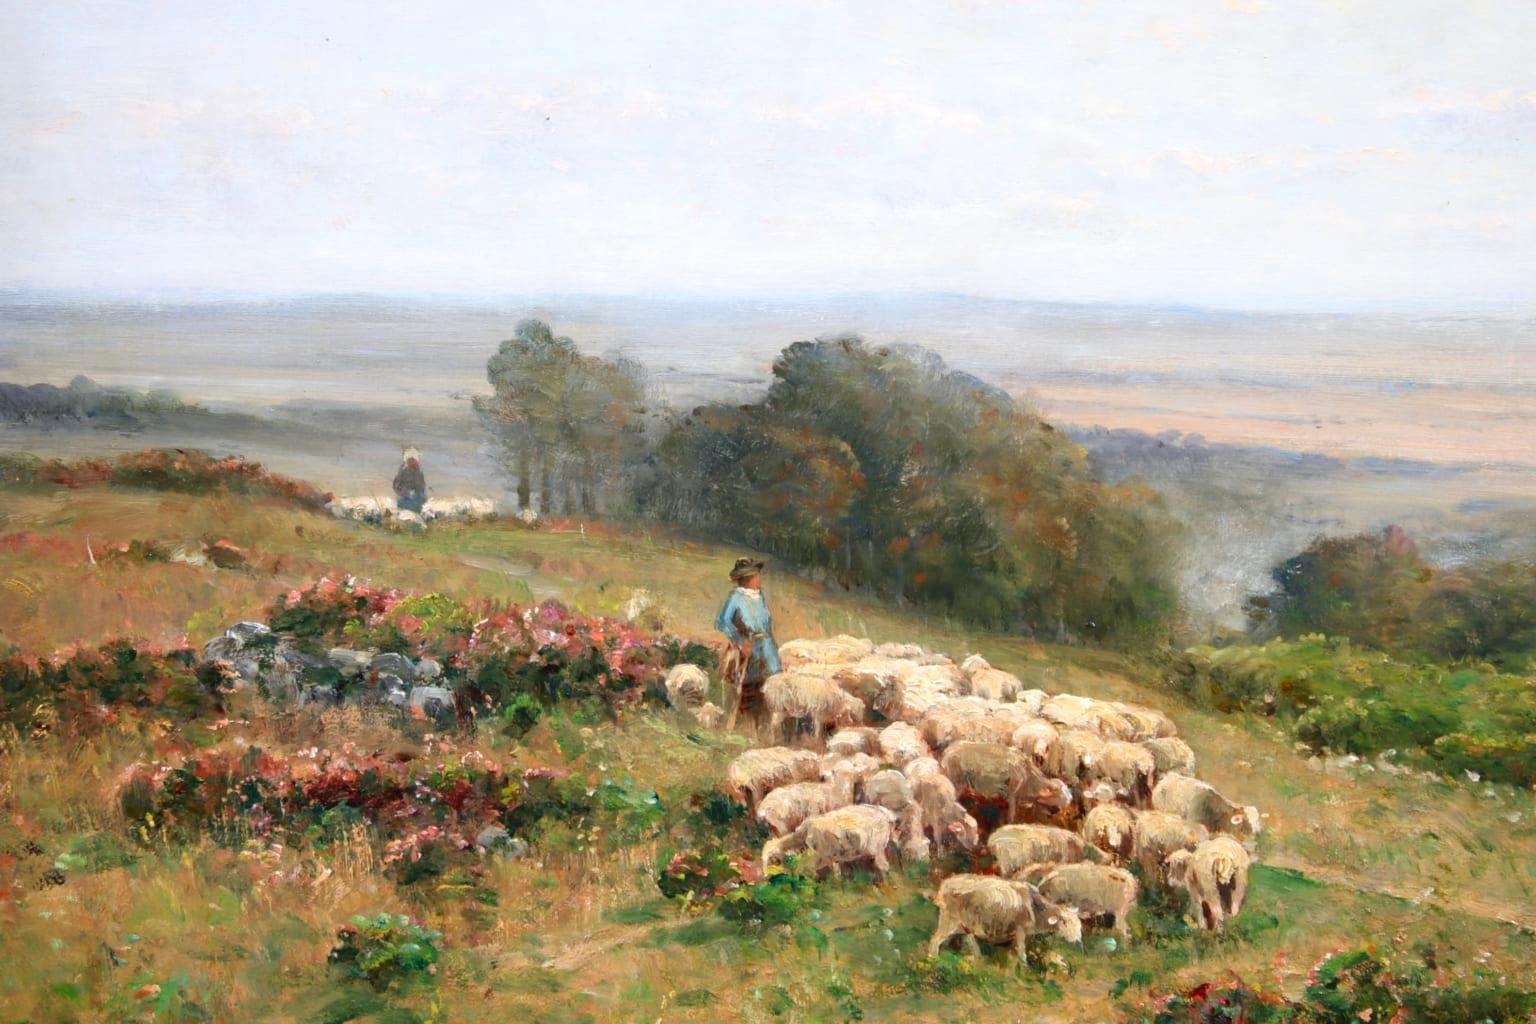 A beautiful oil on original canvas by French Barbizon painter Louis Aime Japy depicting shepherds with their flocks of sheep in a vast pastures. 

Signature:
Signed and dated 1886 lower right.

Dimensions:
Framed: 40